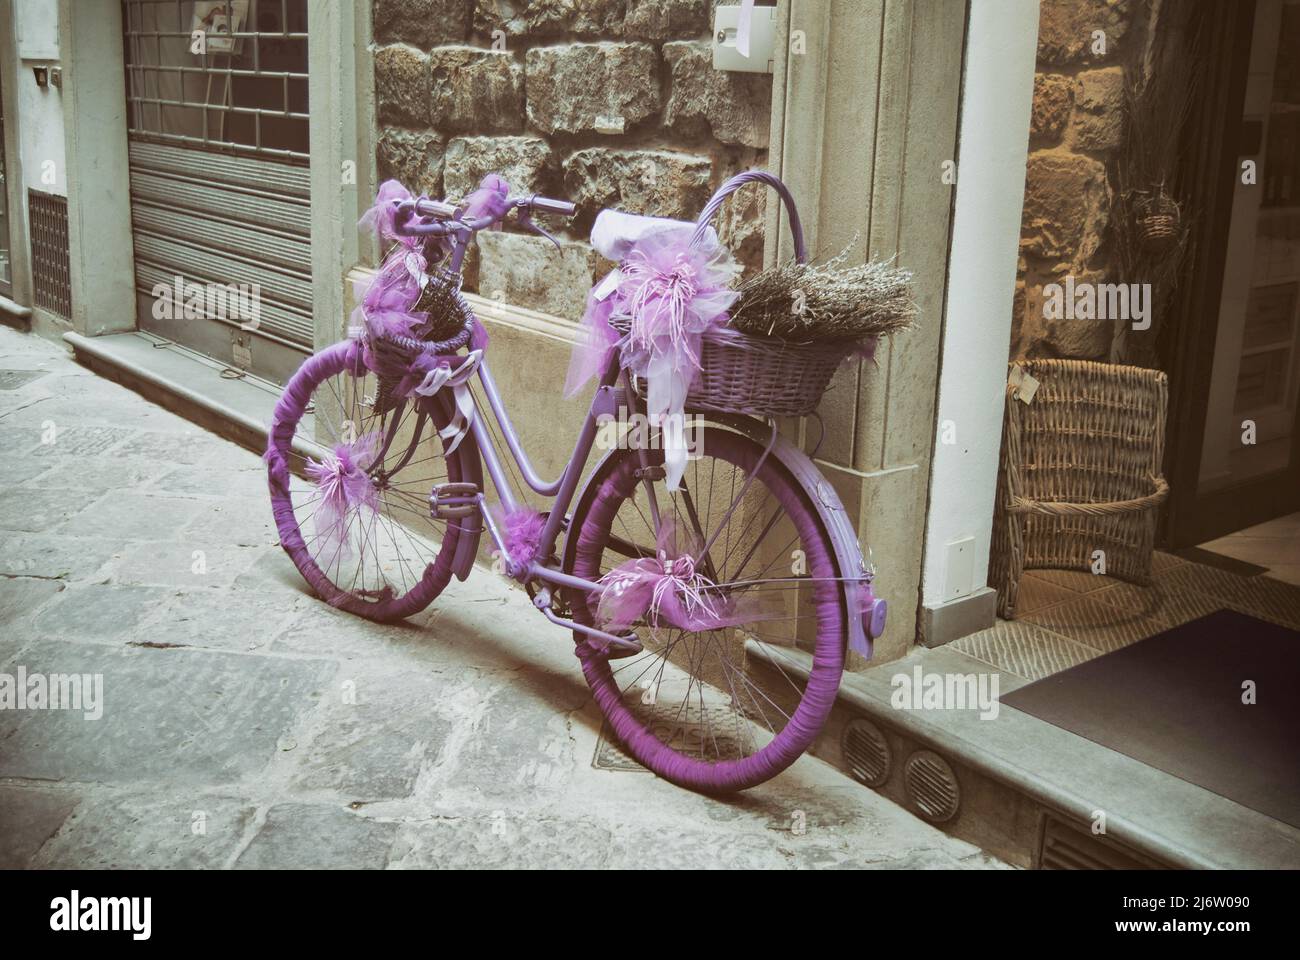 Vintage pink bike in the street Stock Photo